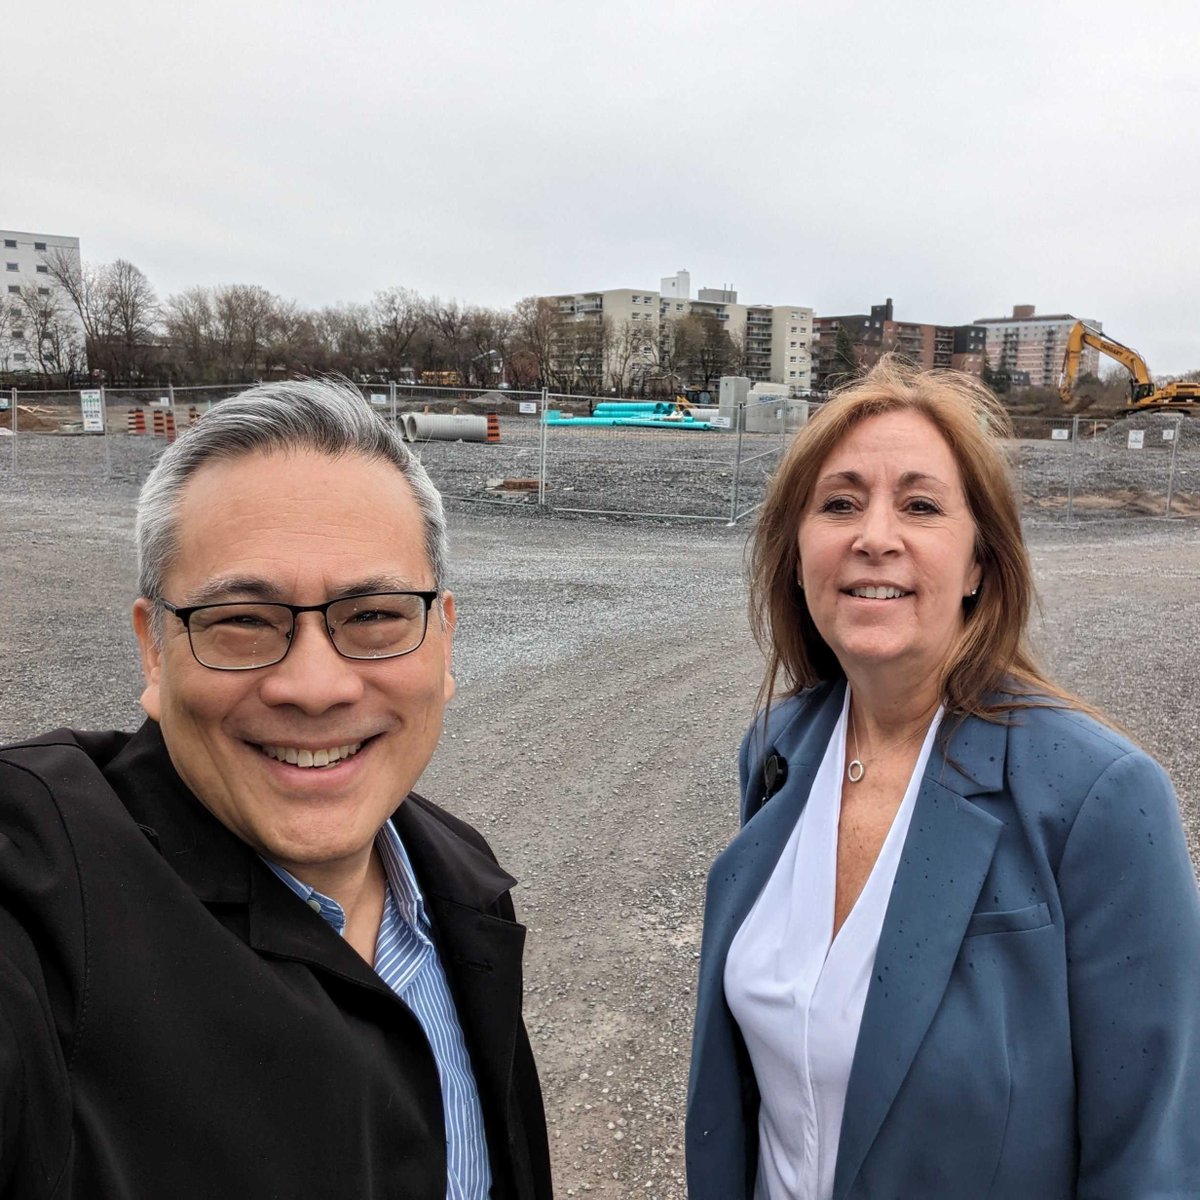 Last week, I visited @PVI_Village getting underway and was able to see @providence_care’s new Providence Manor project and the @HospiceKingston Residence construction. I also spoke about enabling affordable housing as part of the @SrsofProvidence legacy. #ygk #Kinsgton